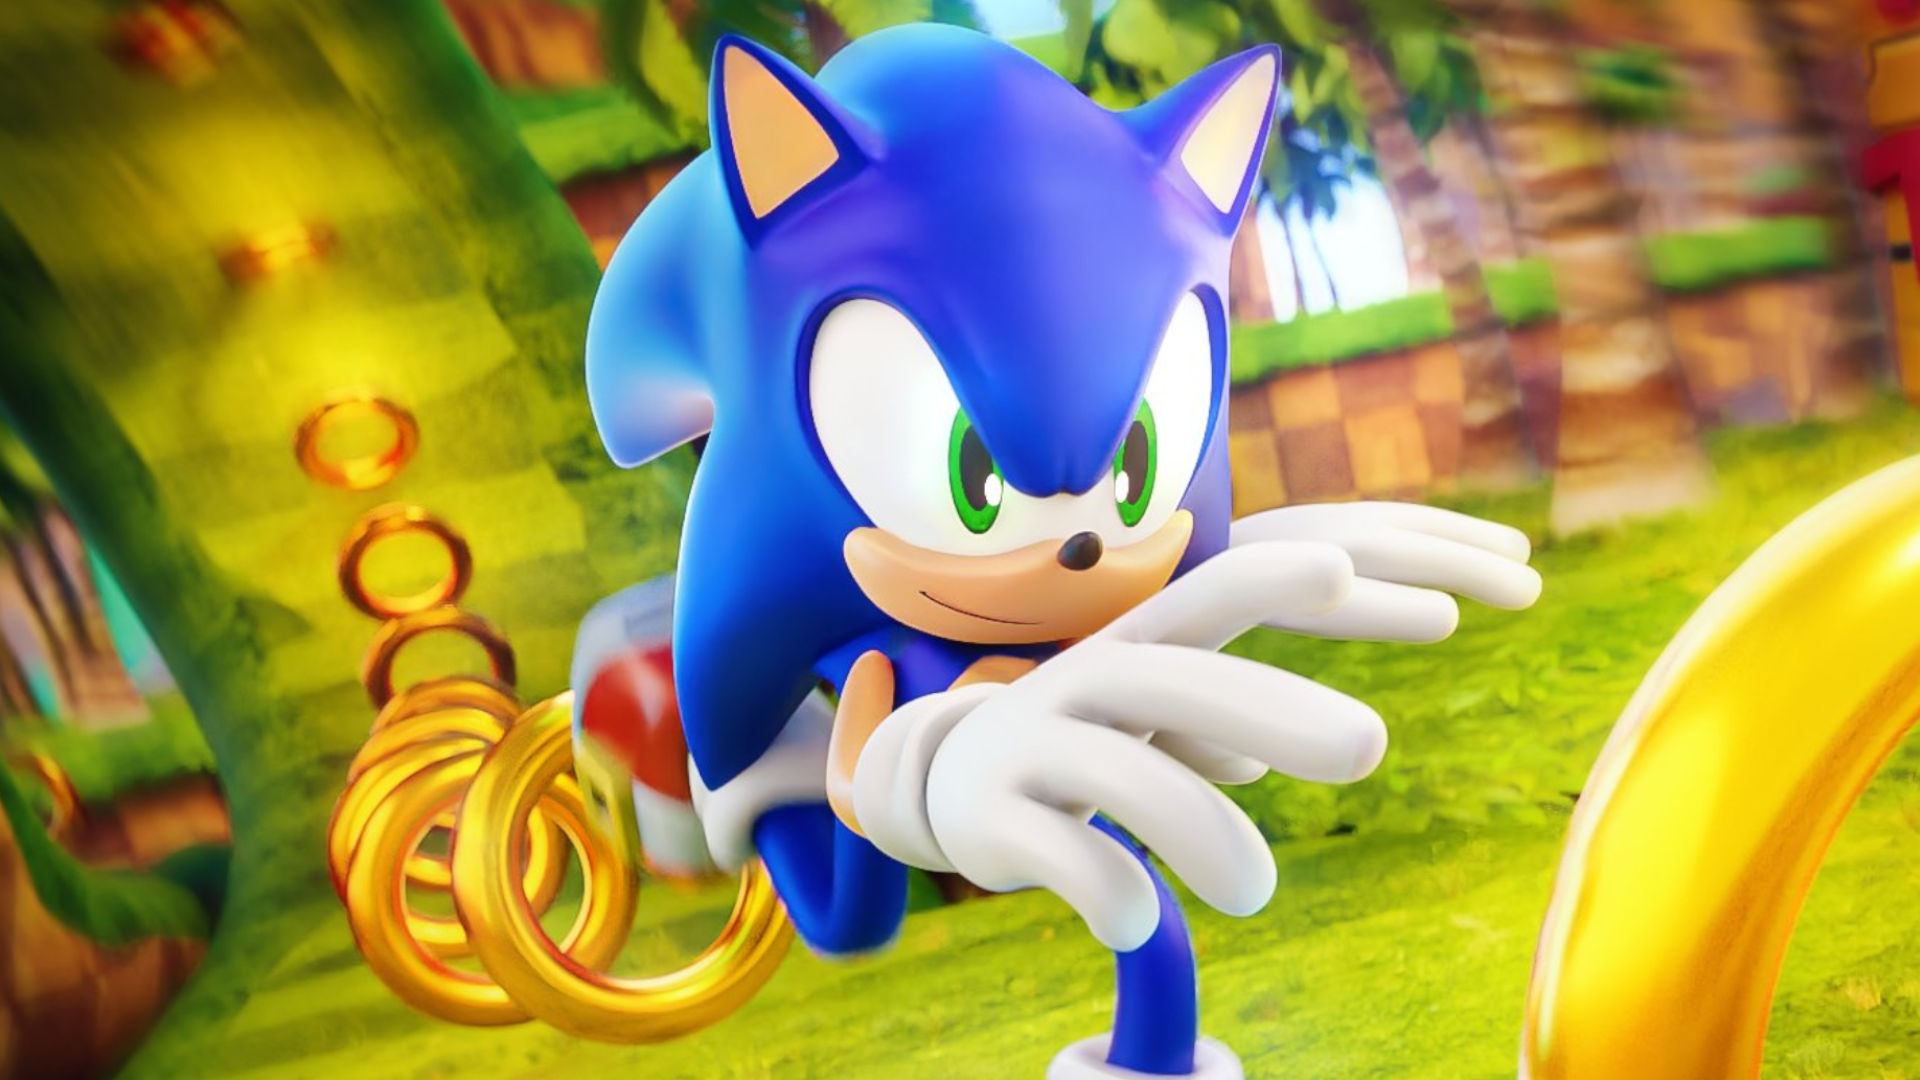 Sonic Speed Simulator codes free skins and more Pocket Tactics